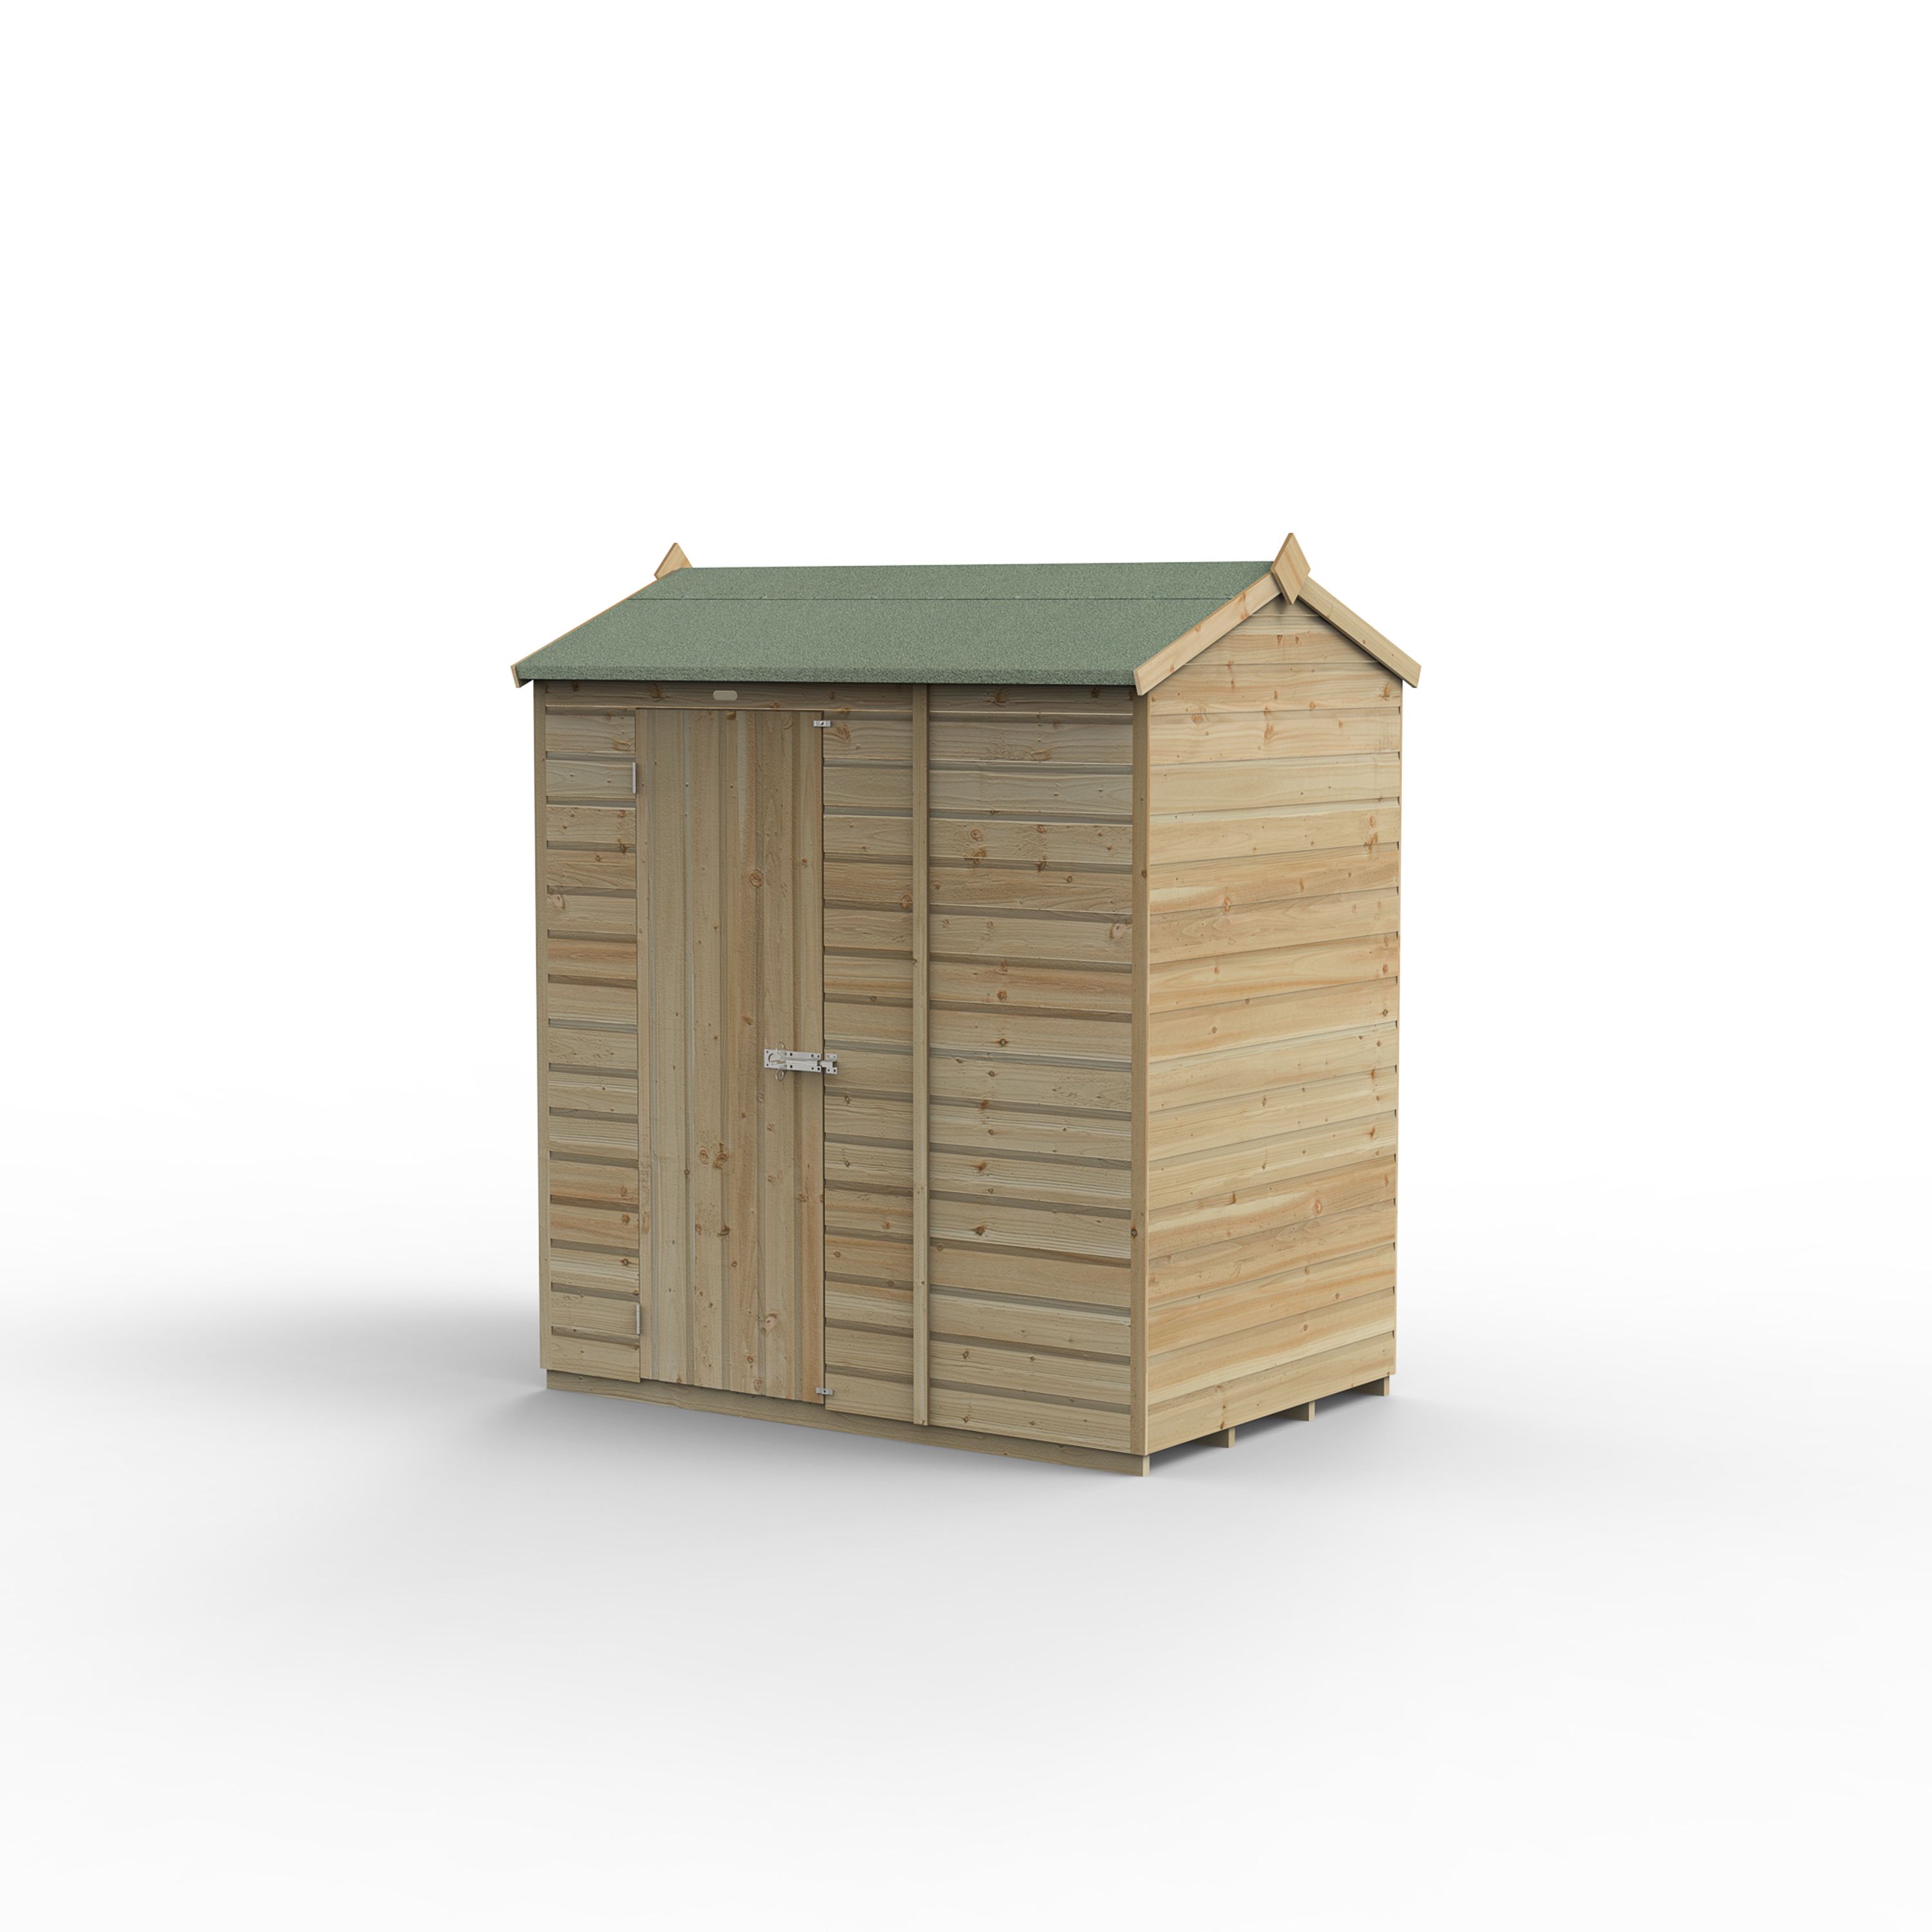 Forest Garden Beckwood 6x4 ft Reverse apex Natural timber Wooden Shed with floor